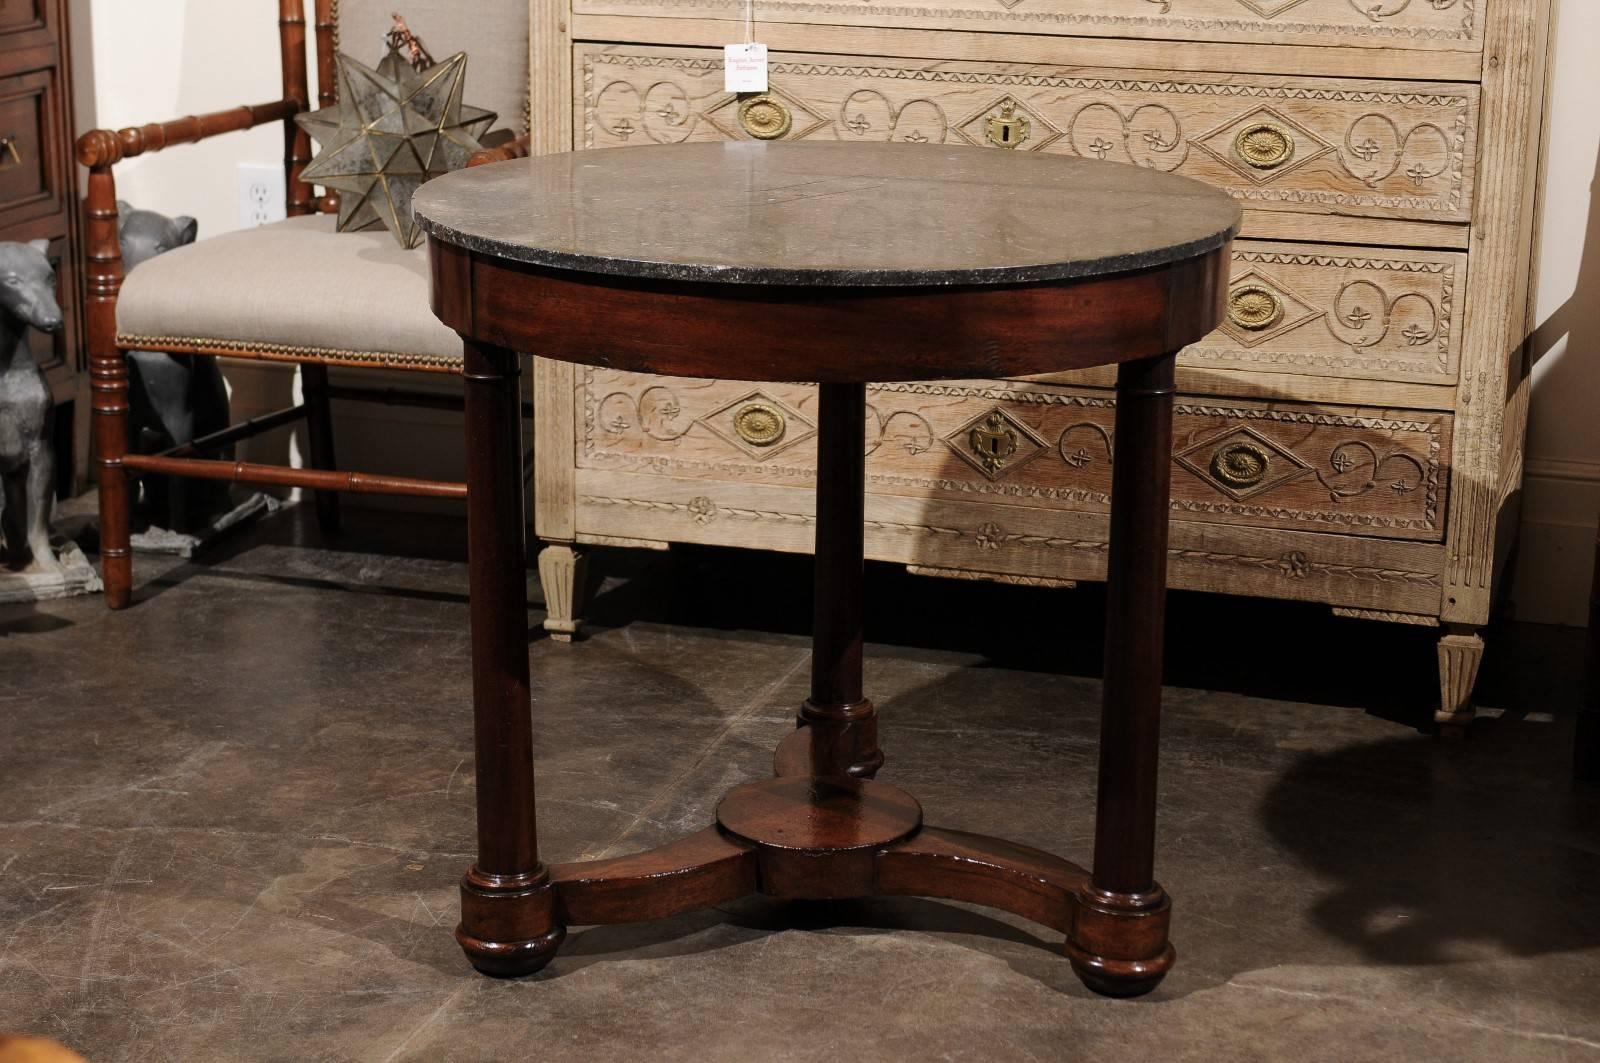 A French mid-19th century Empire style mahogany table with dark grey marble top over a tripod base with cross stretcher. This French center table was born circa 1840, not long after the fall of the French First Empire. Typical of the Napoleonic